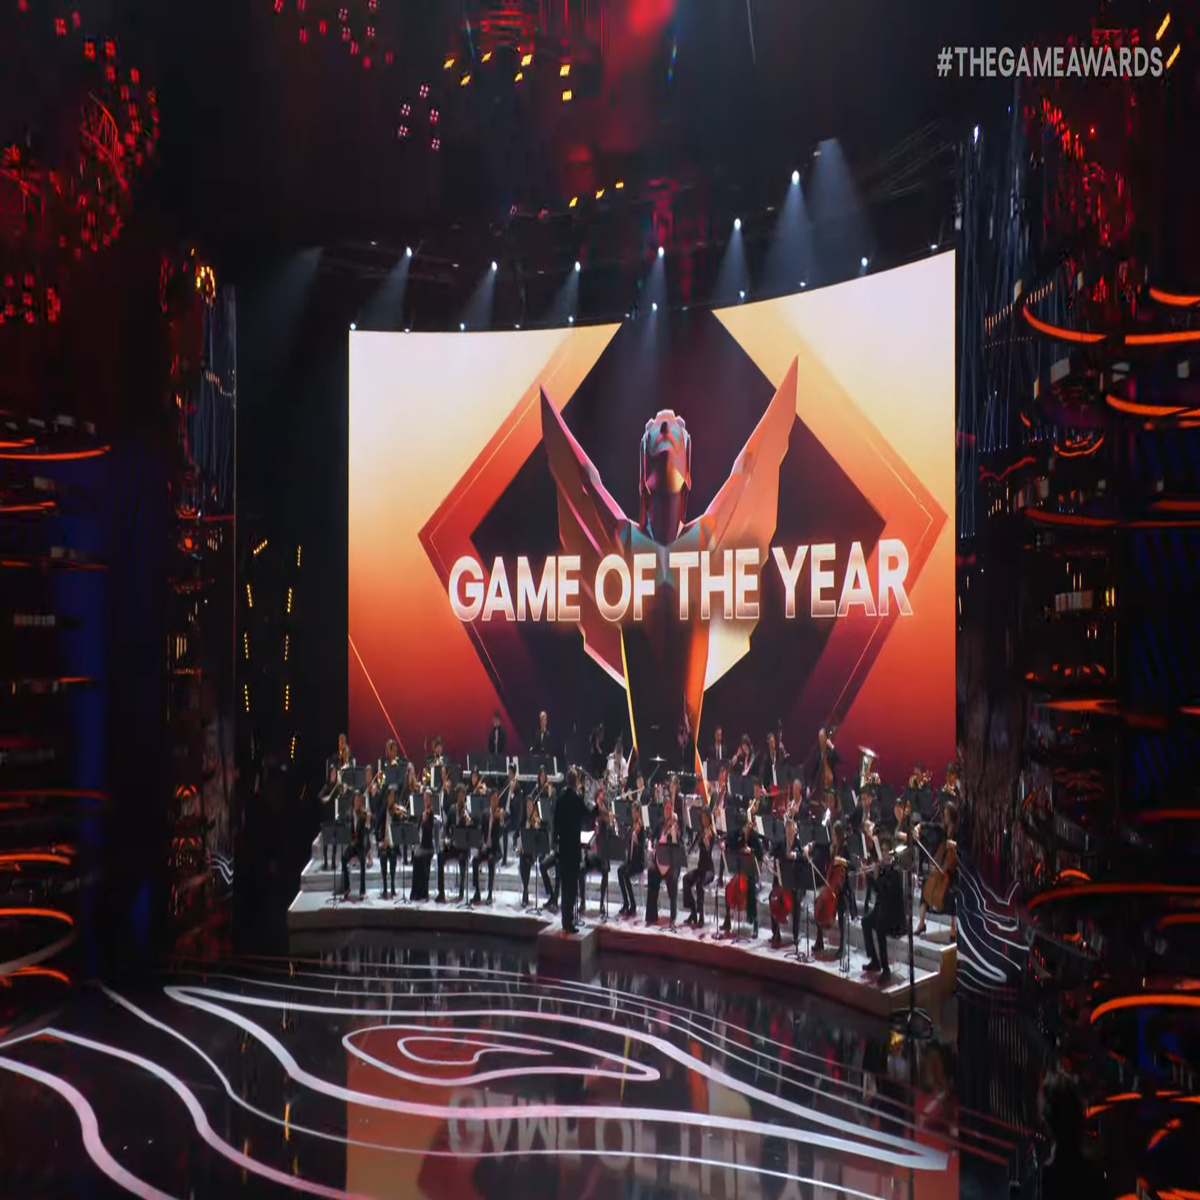 The Game Awards 2022 has attracted a record number of viewers